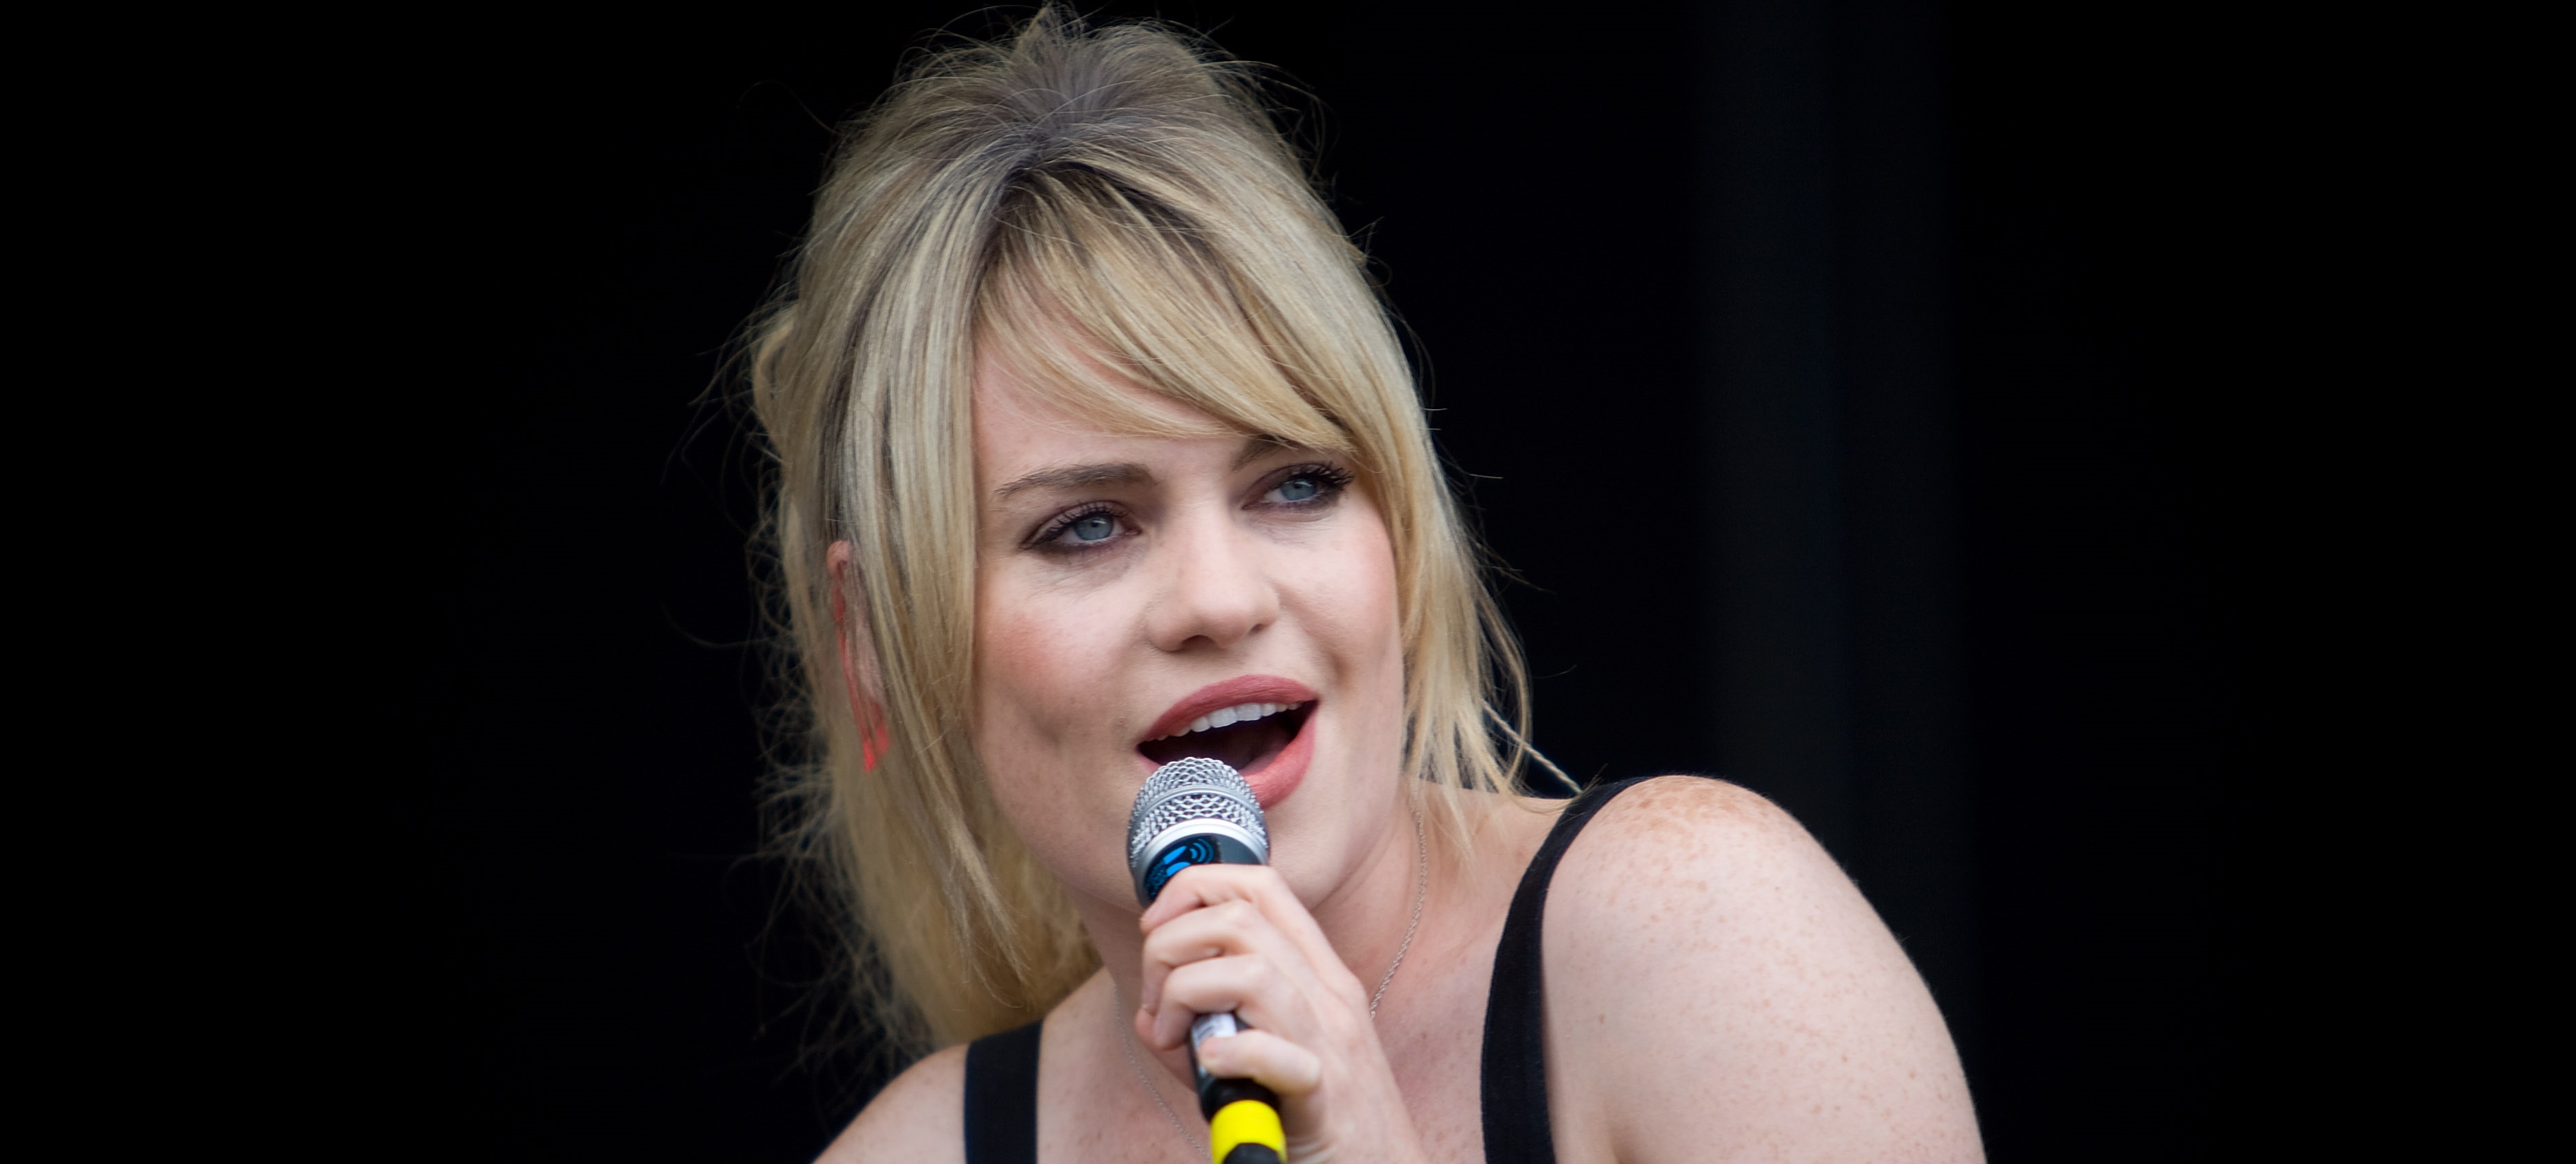 Singer Duffy Reveals She Stepped Away From Showbiz As She was Drugged & Raped